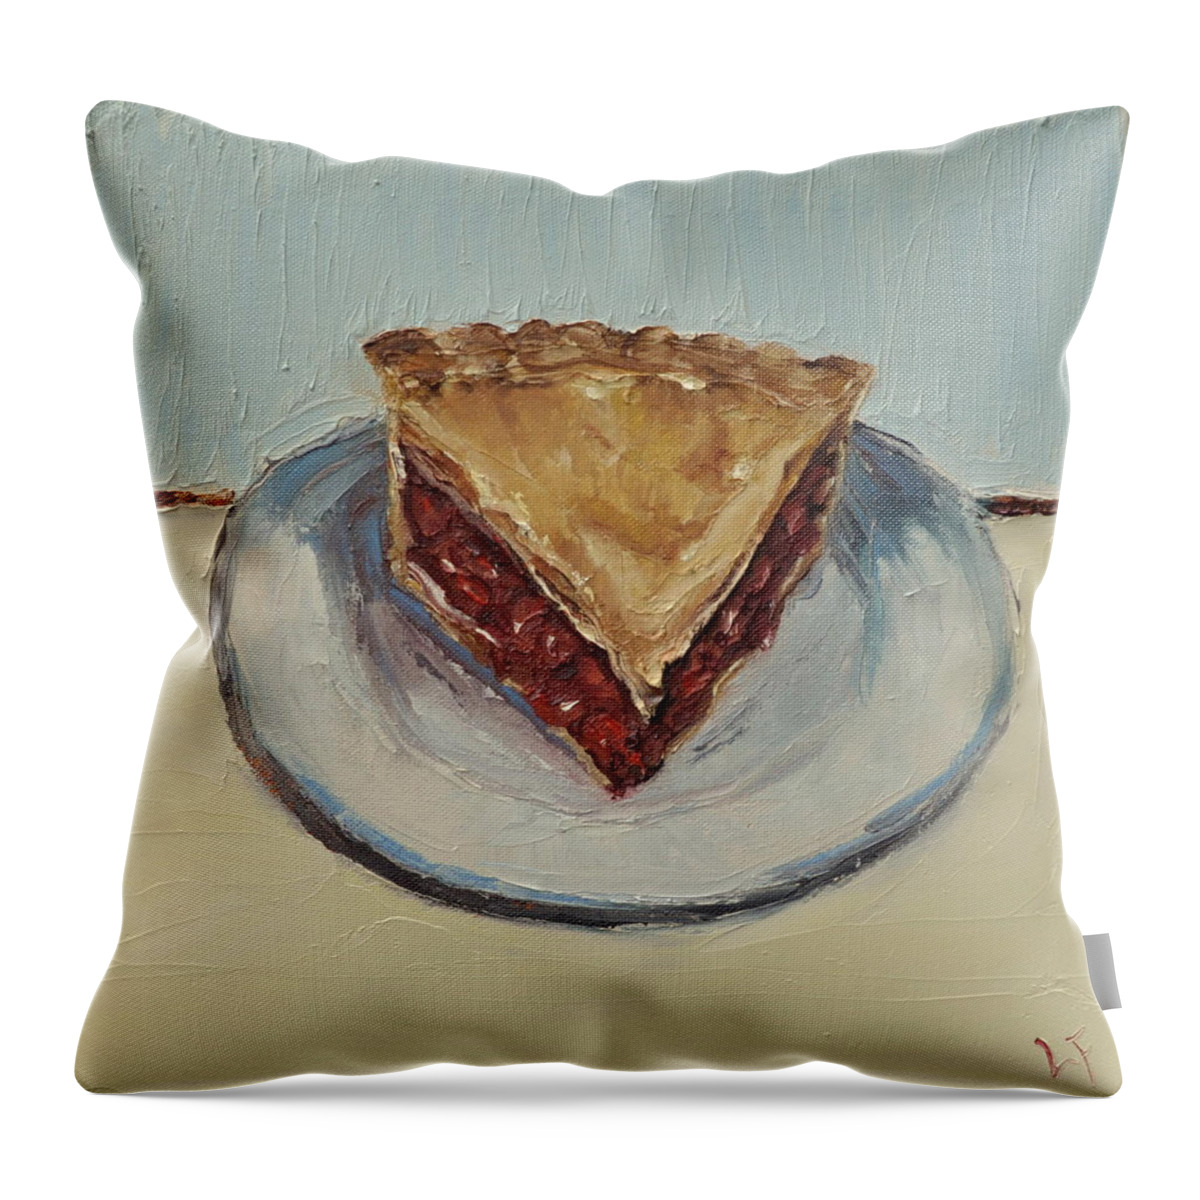 Cherry Pie Throw Pillow featuring the painting Cherry Pie by Lindsay Frost